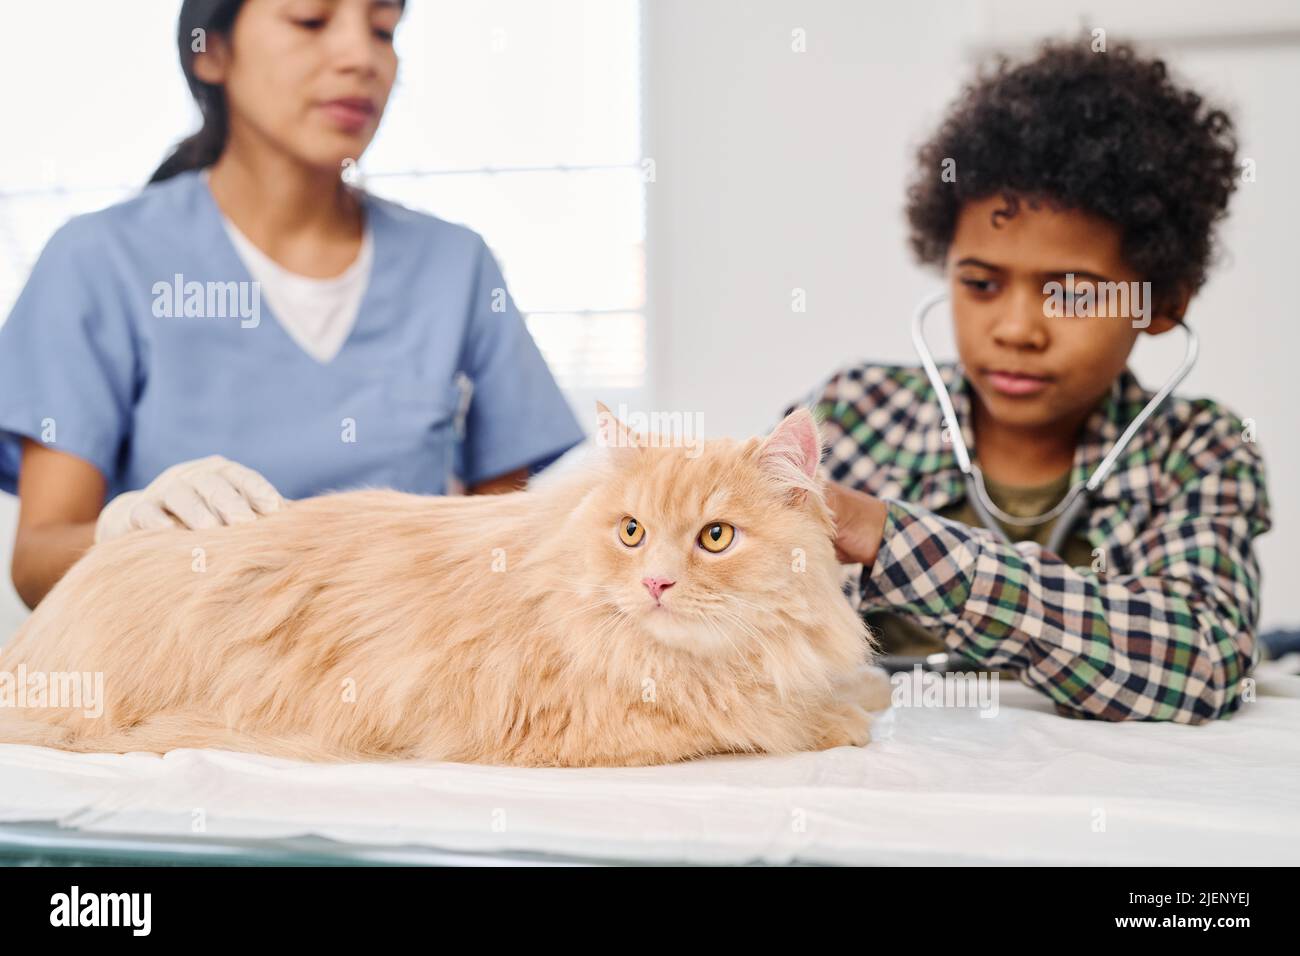 Modern African American kid using stethoscope to listen to ginger cats body inner sounds in veterinary clinic Stock Photo